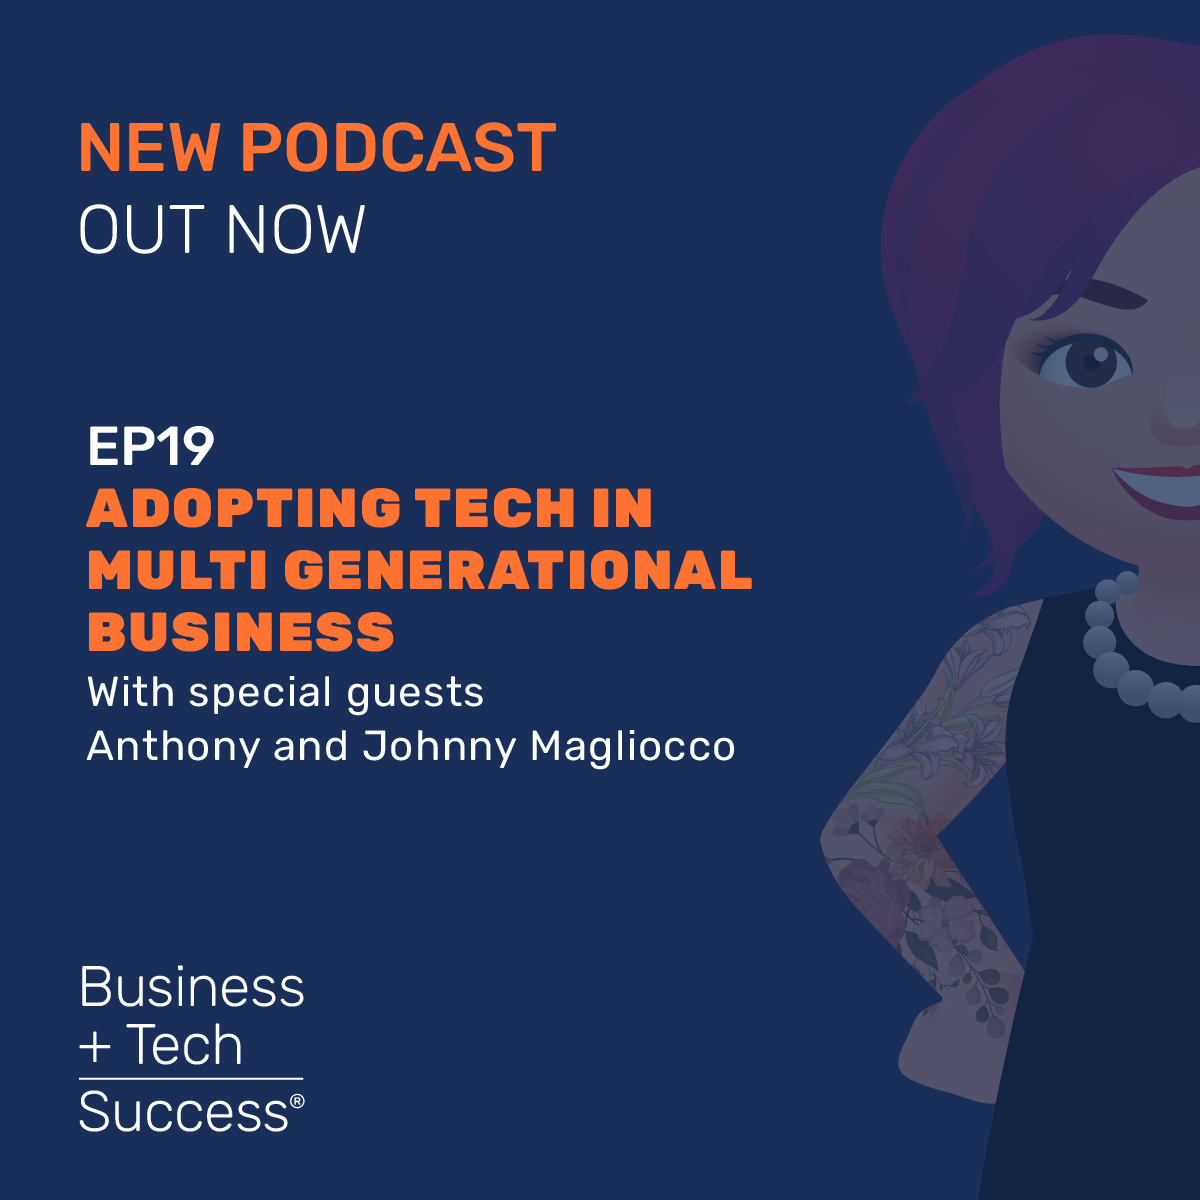 Adopting Tech In MultiGenerational Business With Johnny and Anthony Magliocco